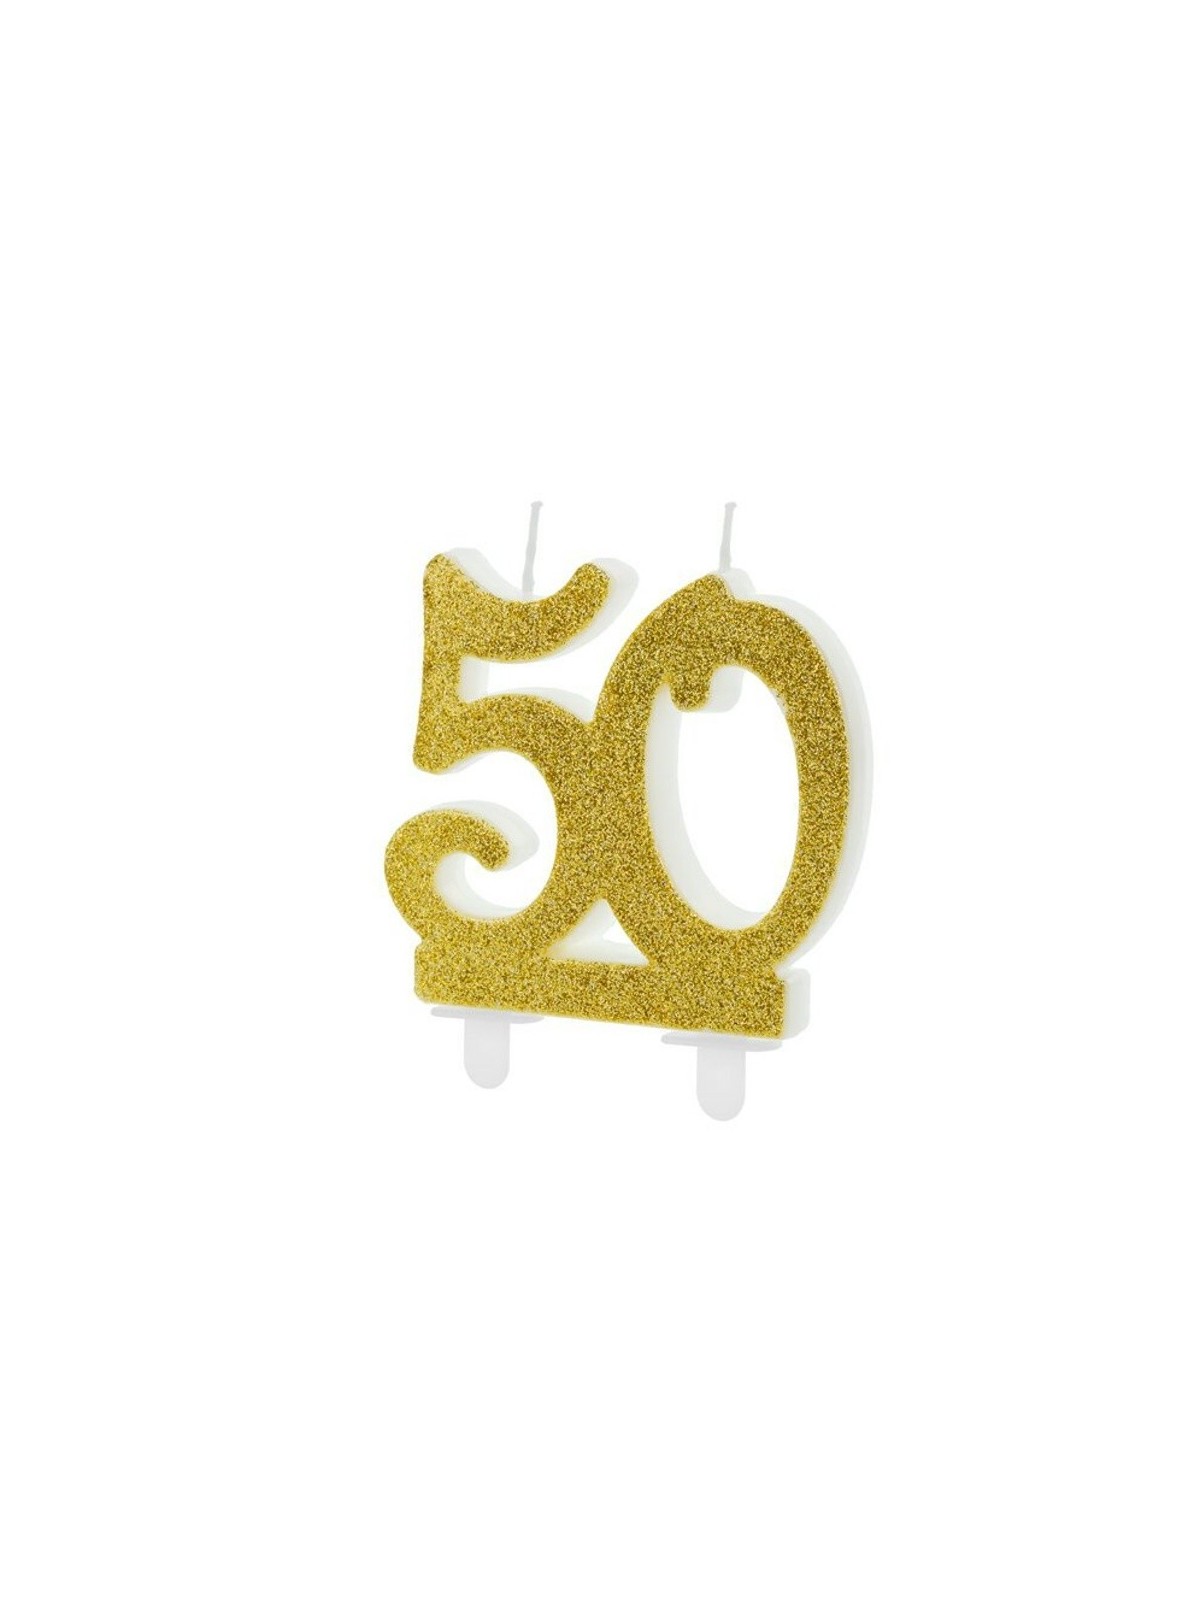 PartyDeco jubilee candle large - glitter gold - 50